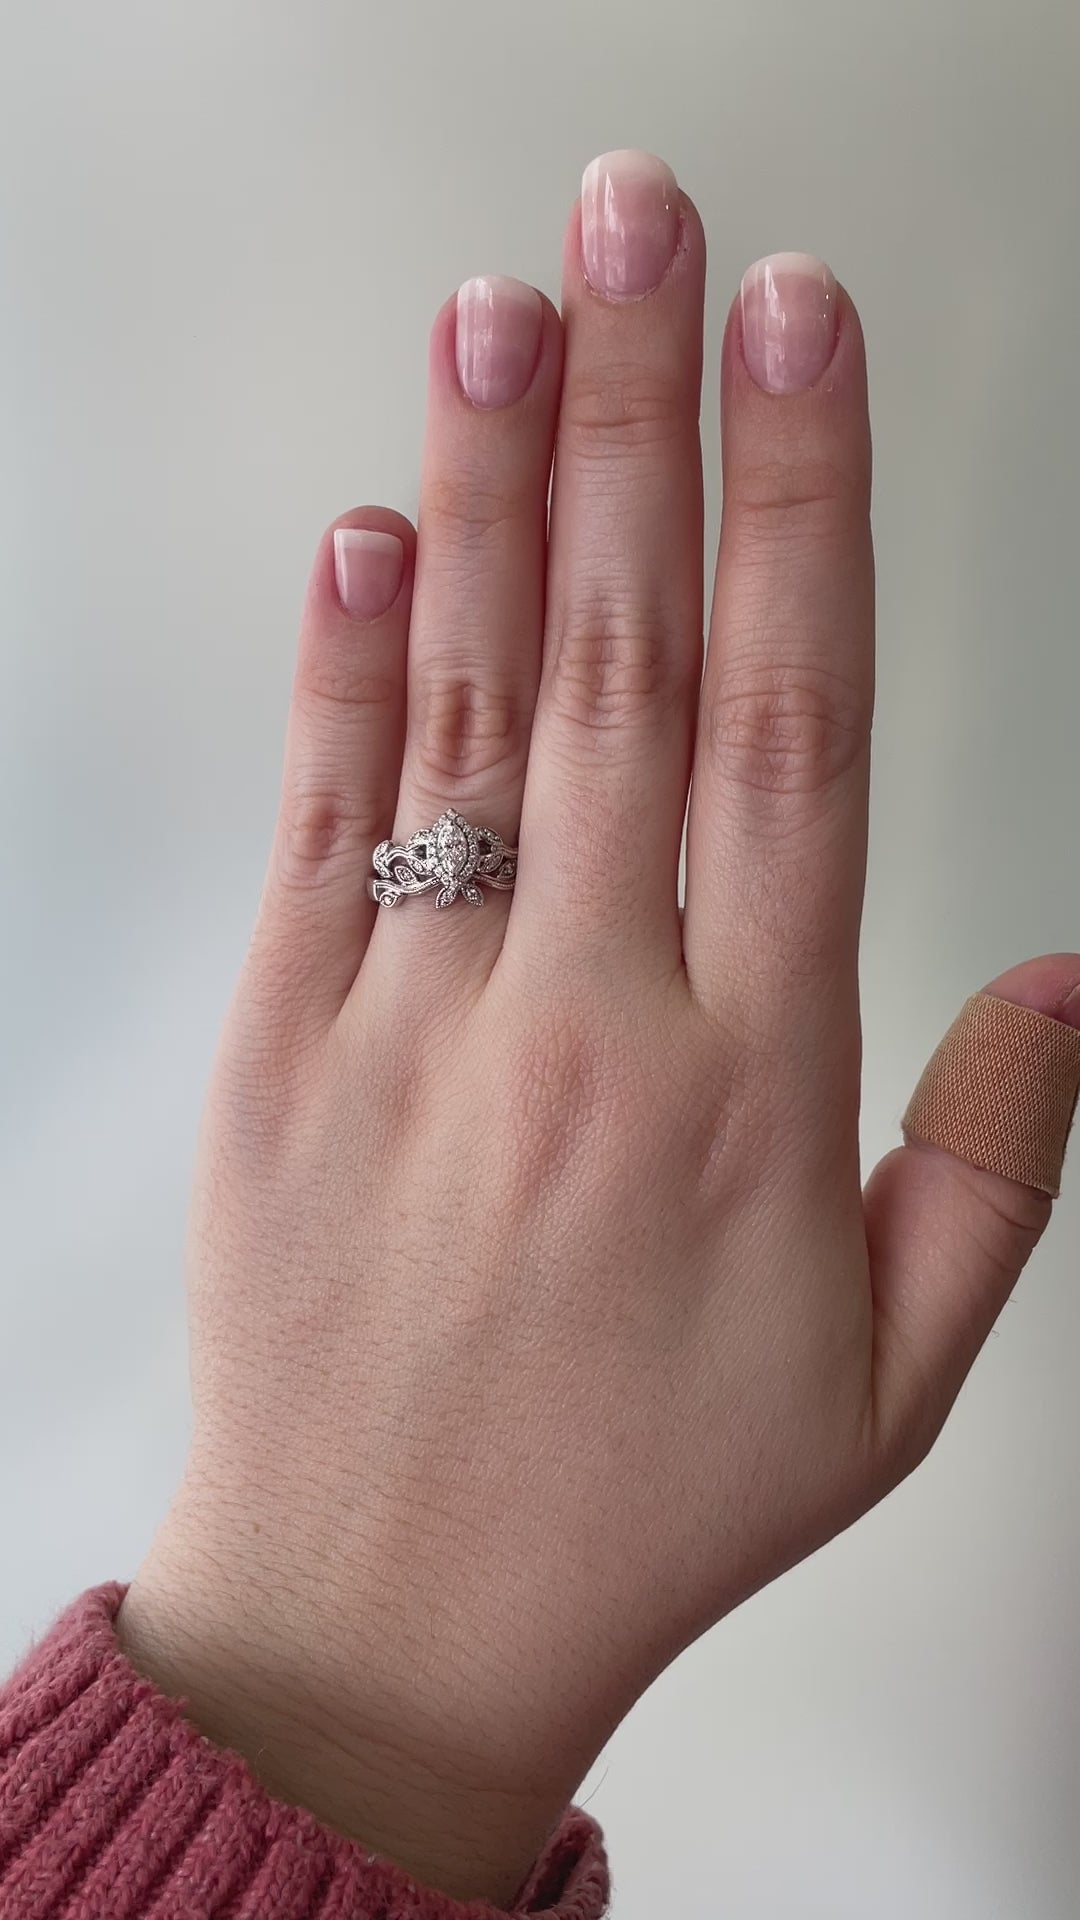 short video clip of the wedding set on a hand shot in natural light.